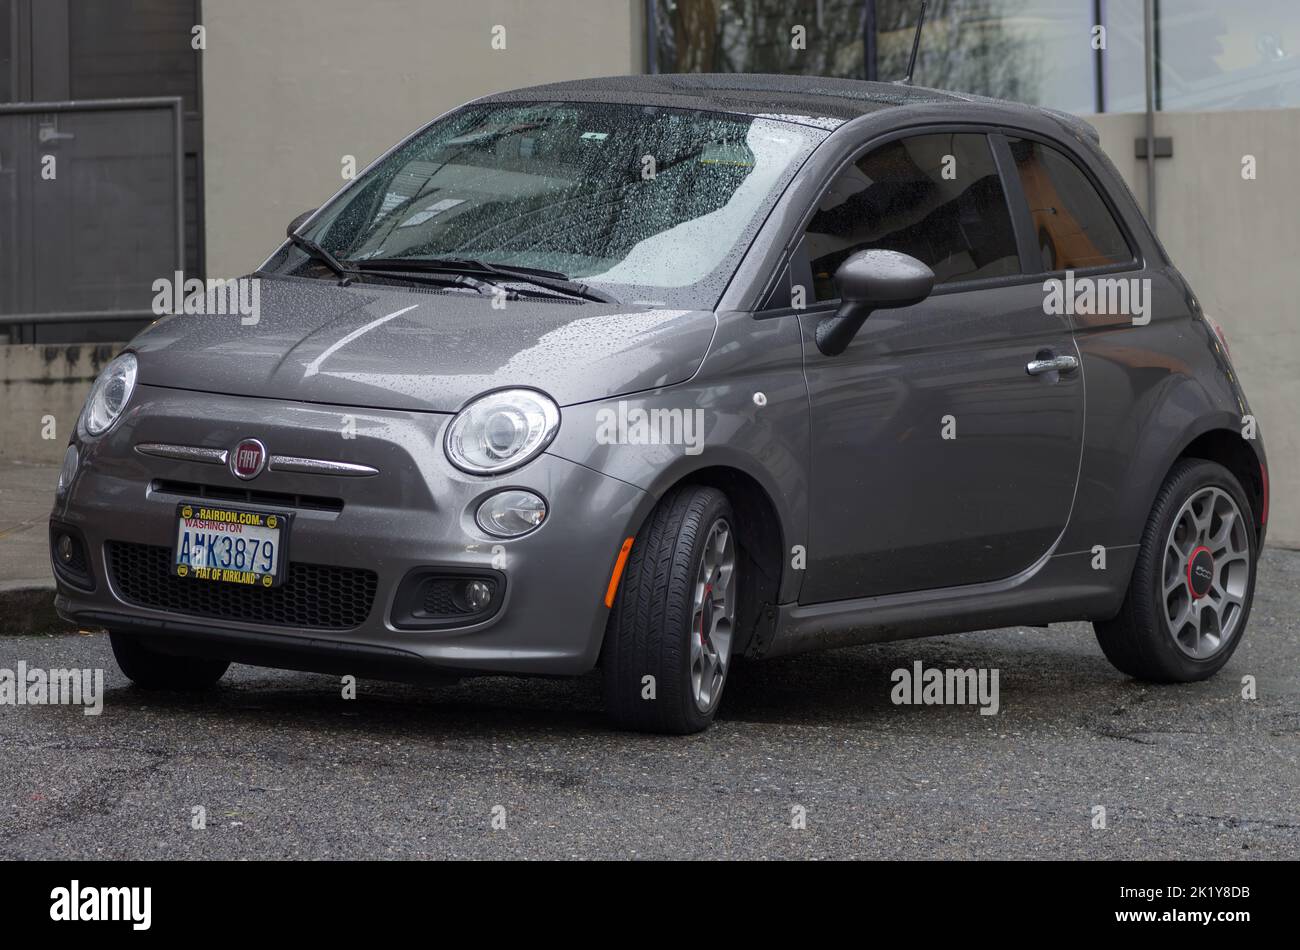 Seattle, Whasignton, Uninited States - January 17th, 2016: modern Fiat 500 shown parked on a rainy day. Stock Photo